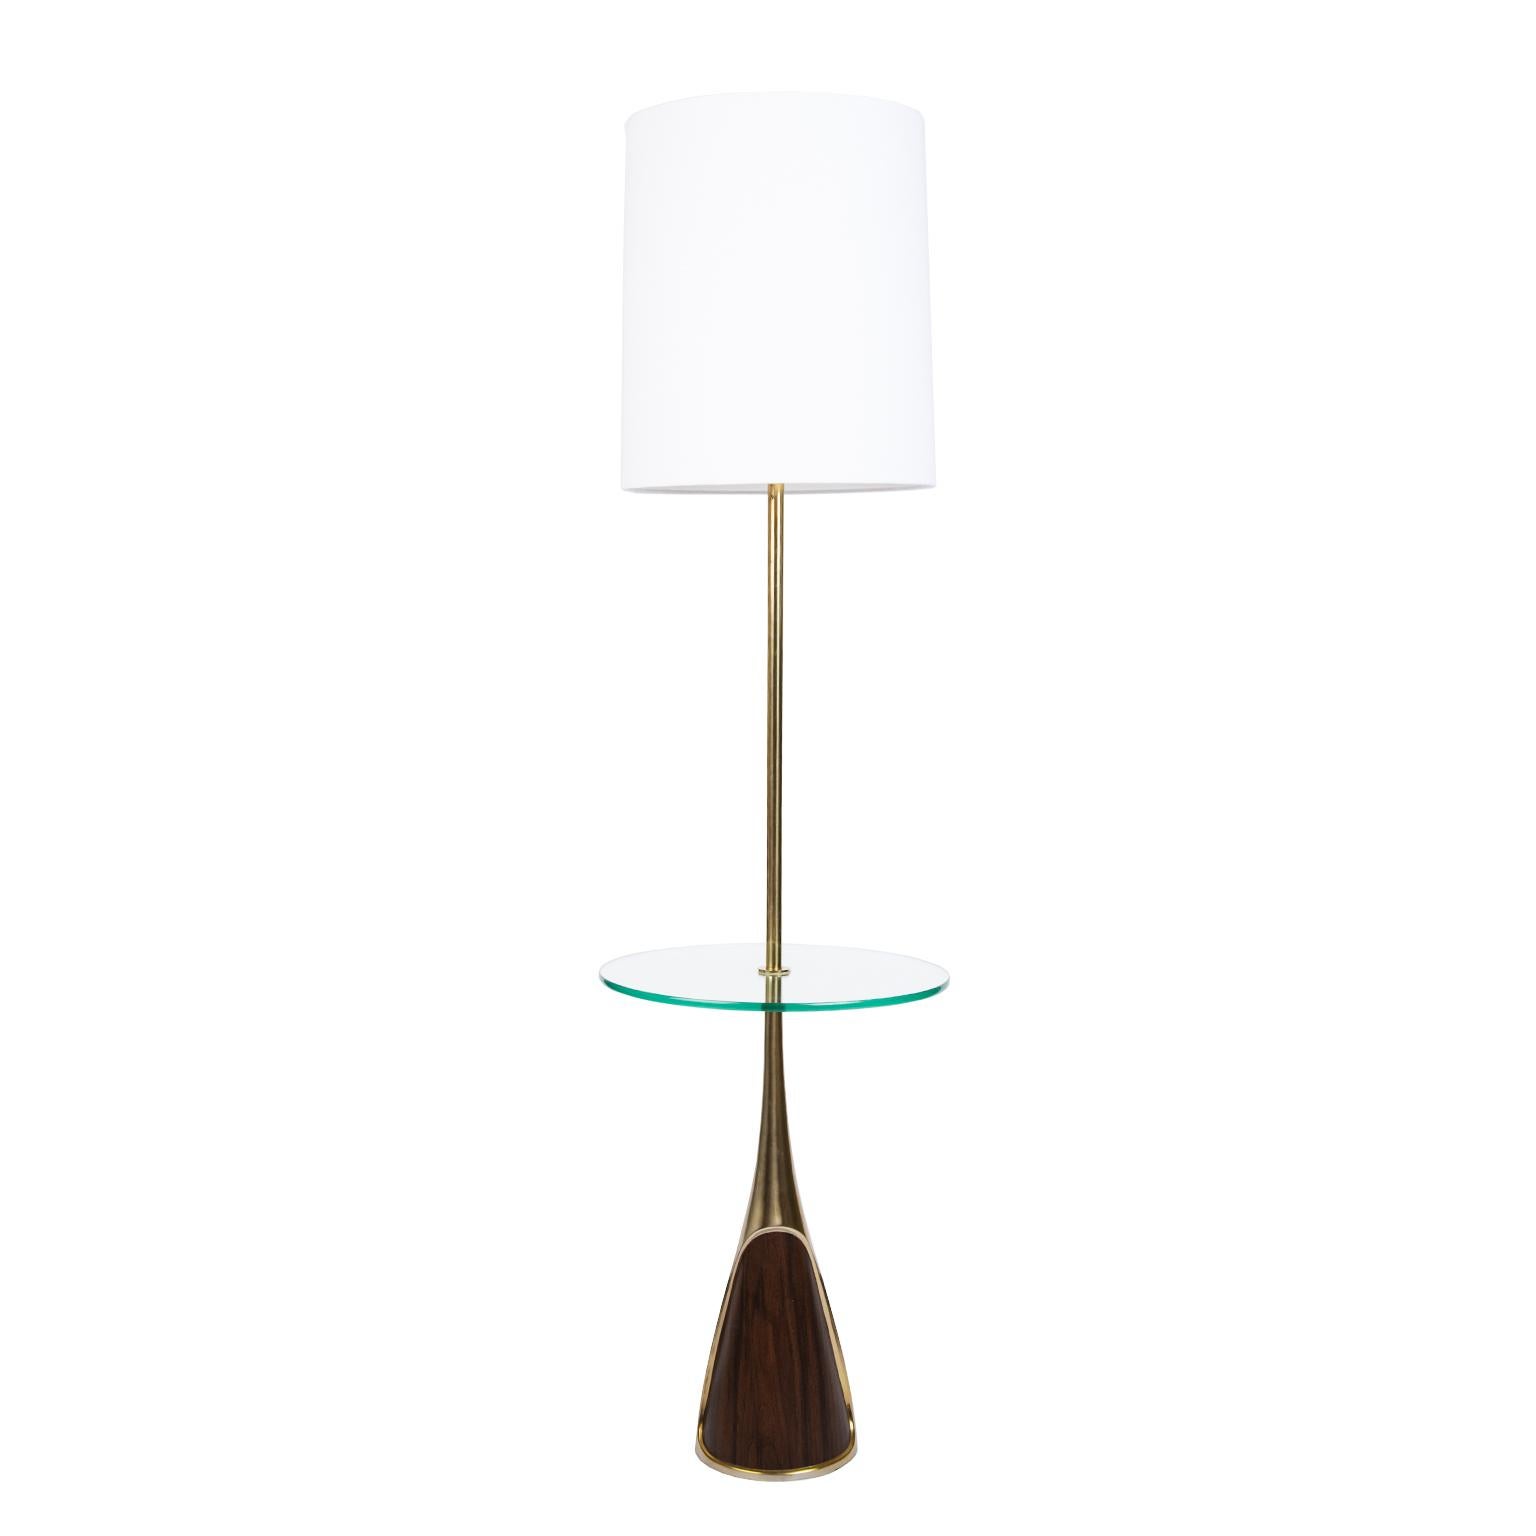 It is a rare sight indeed to find a pair of these moderne ultra chic MCM brass plated lamps with 